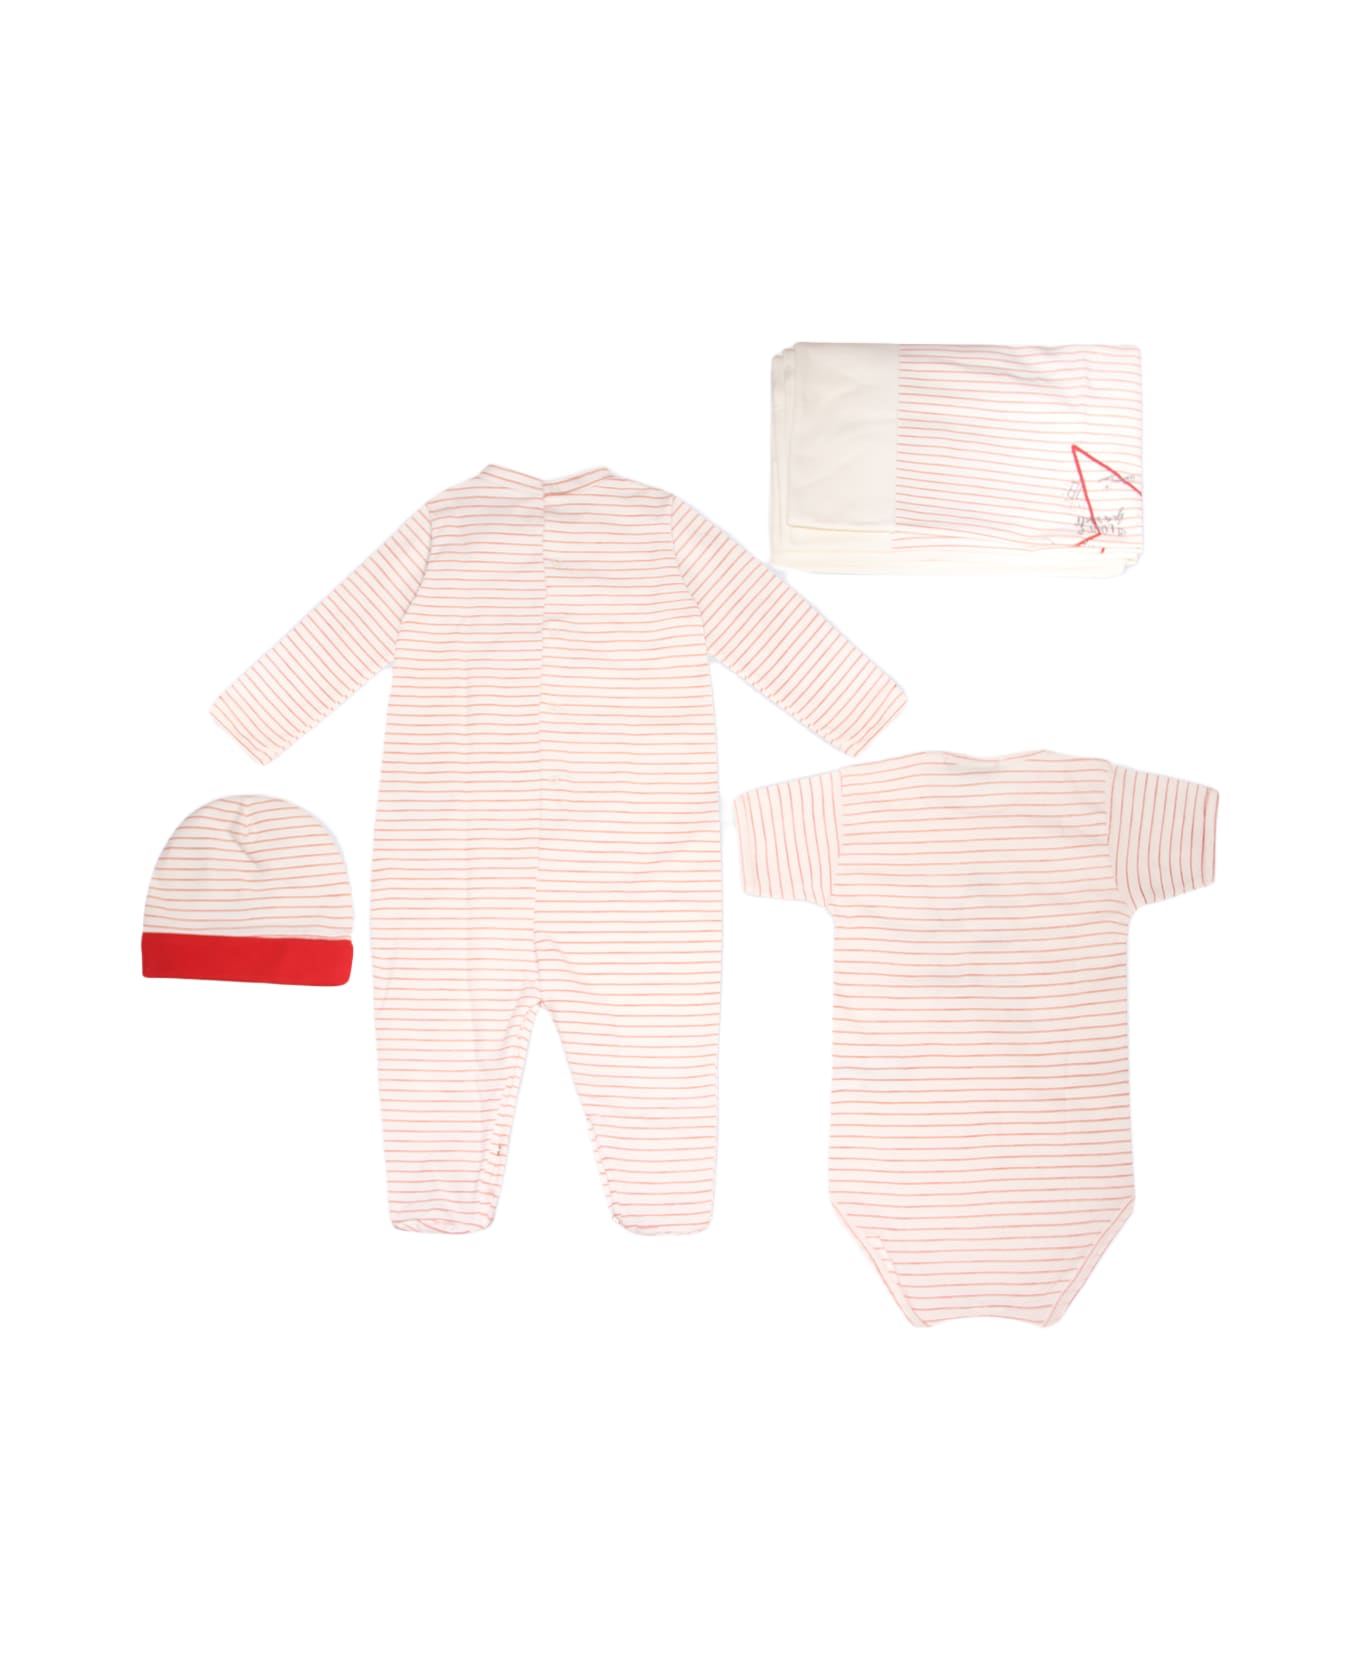 Golden Goose Red And White Cotton 4 Pieces Nursery Set